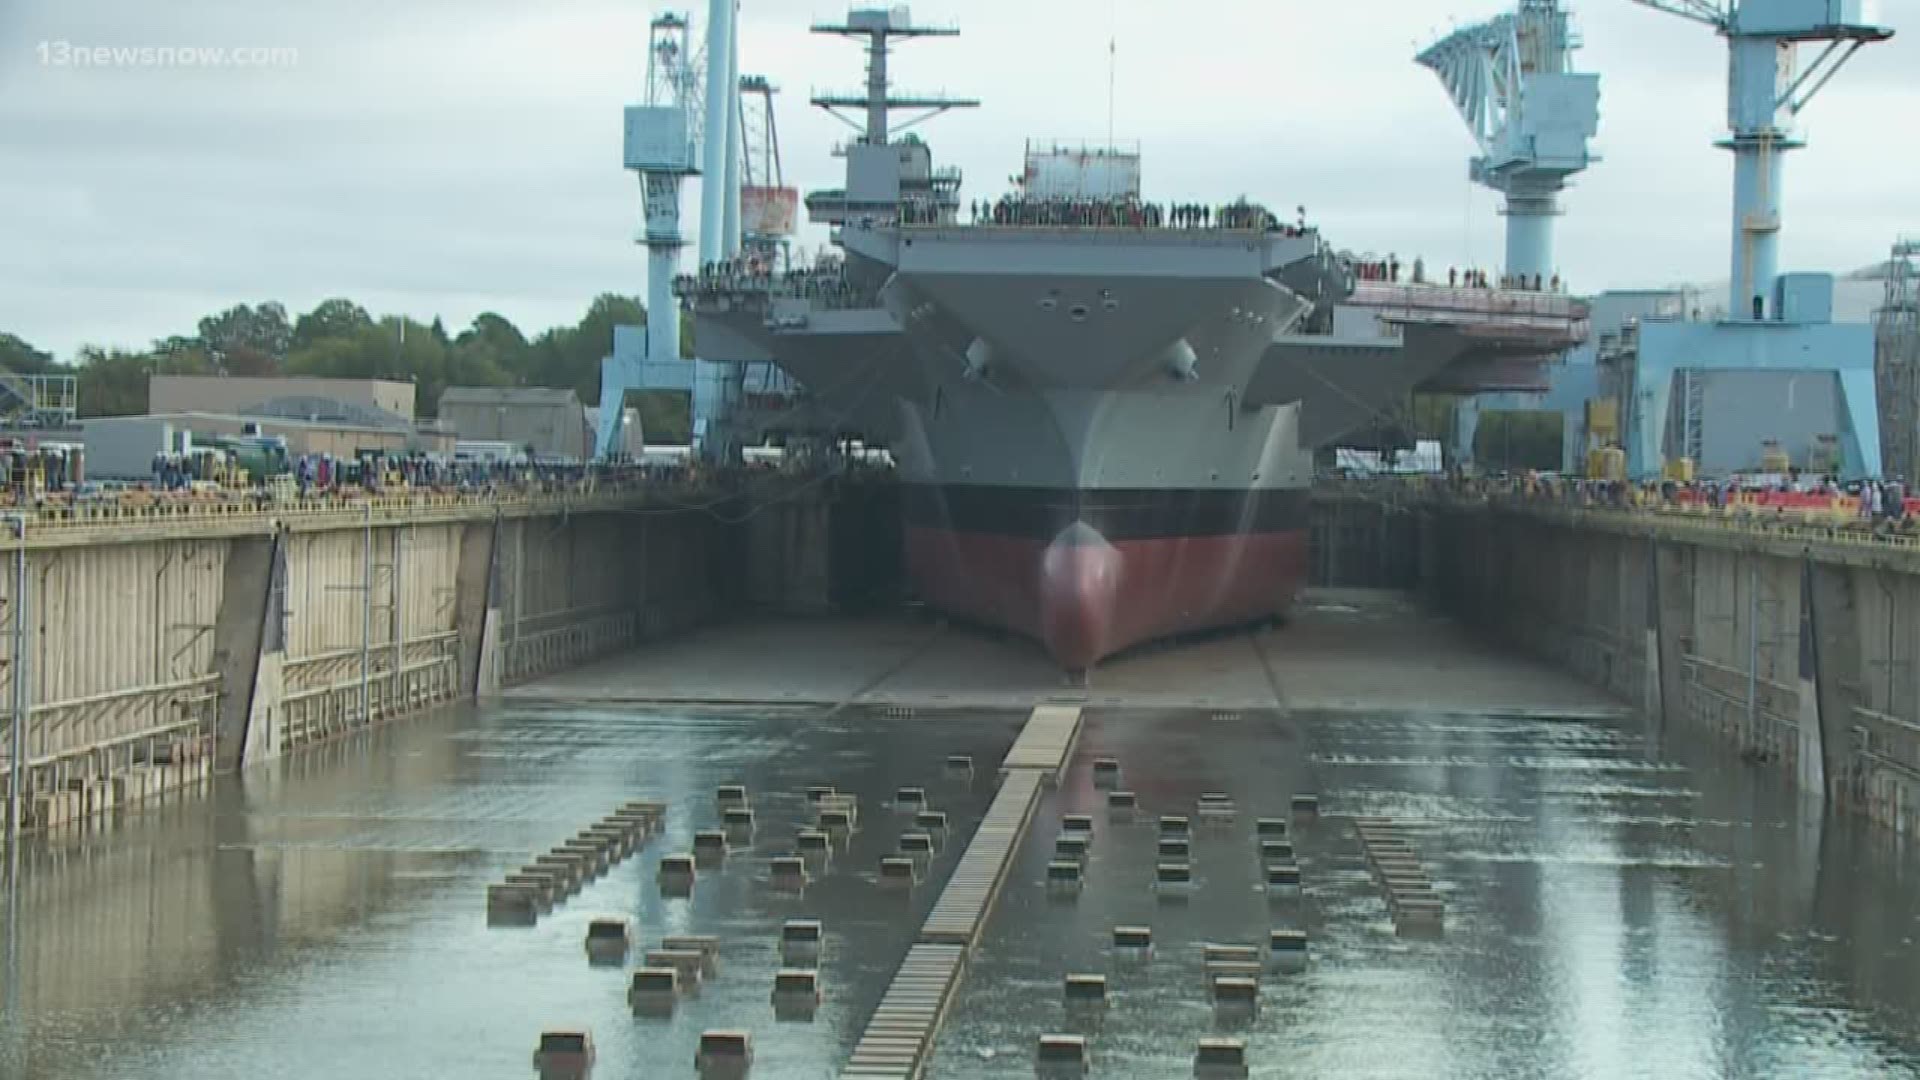 After several problems, the USS John F Kennedy took a big step. The ship is ready to leave the dry dock.